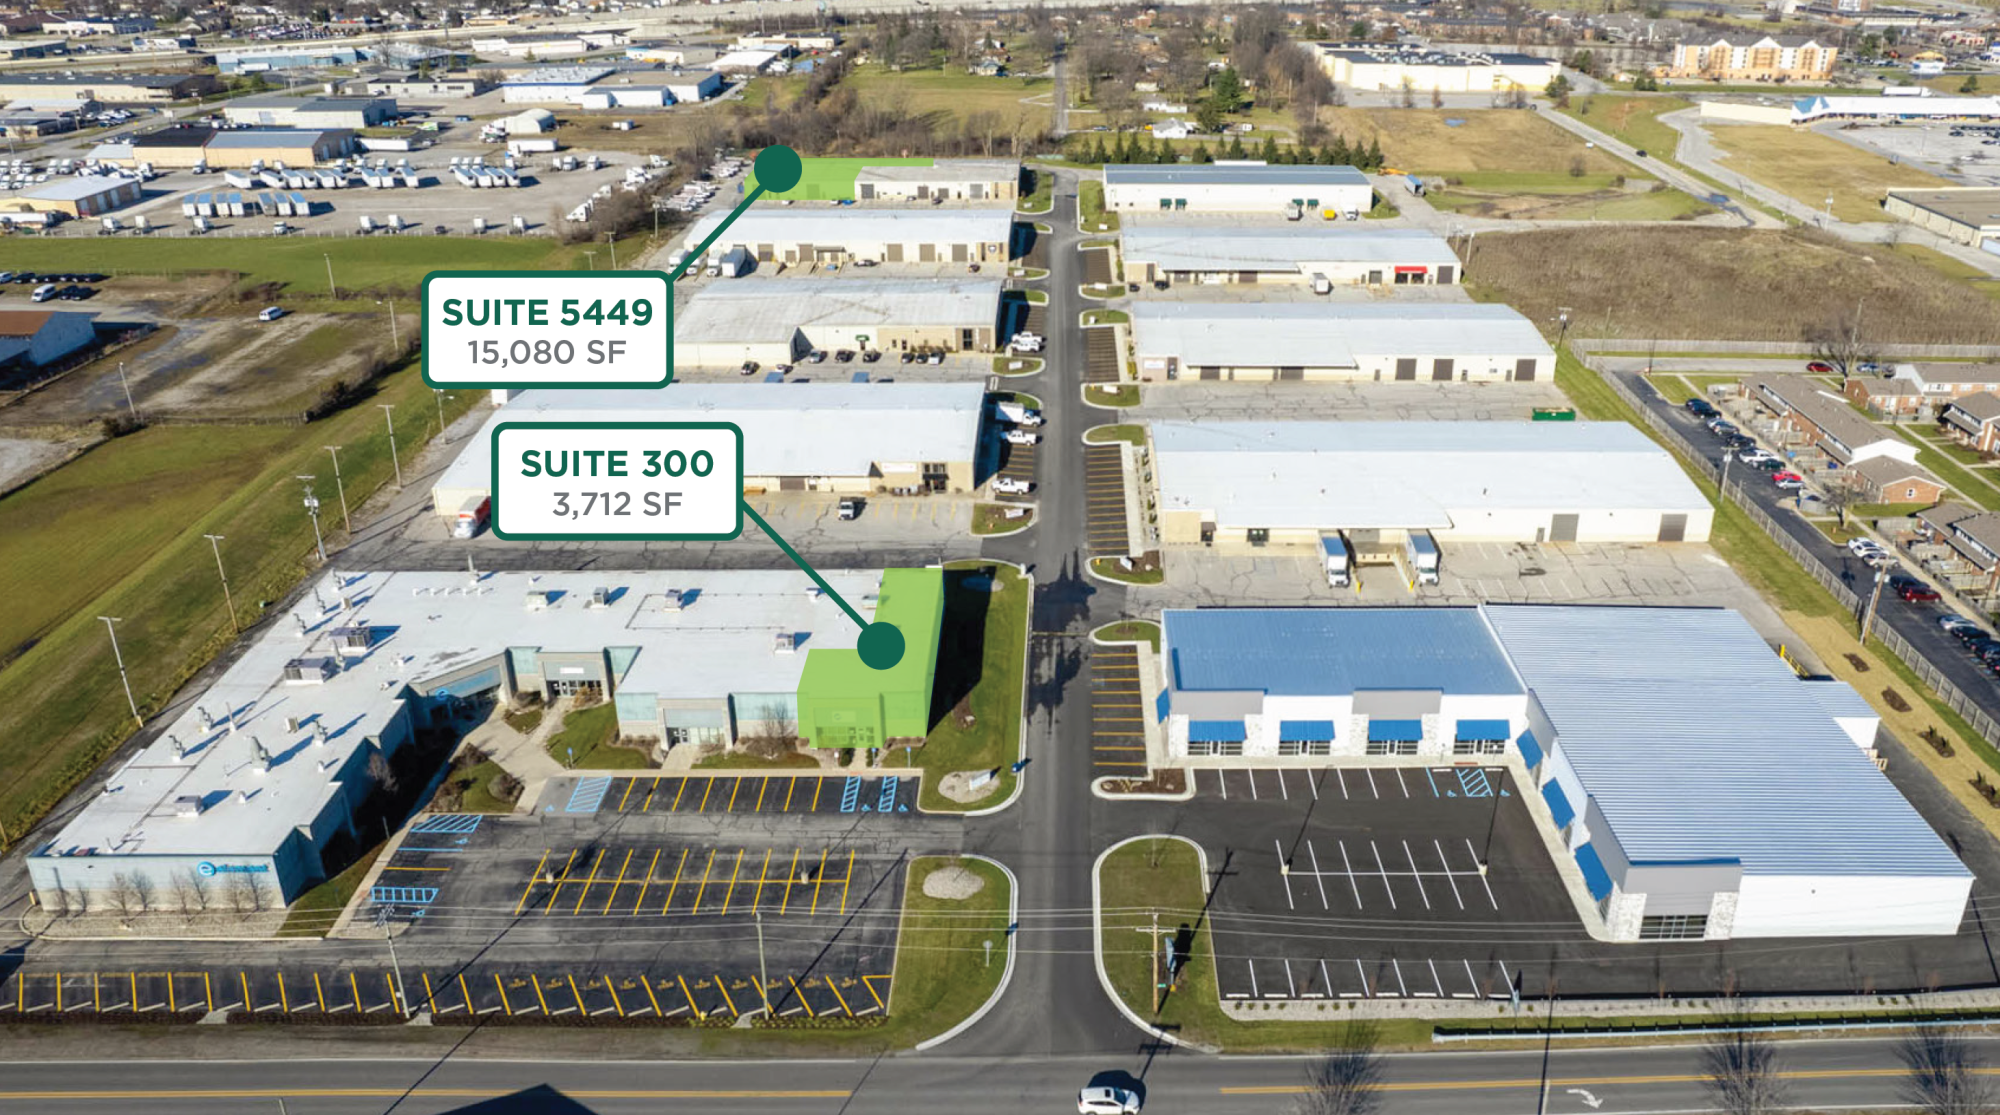 Sturges Property Group - Keystone Industrial Park Fort Wayne Indiana Industrial Space For Lease